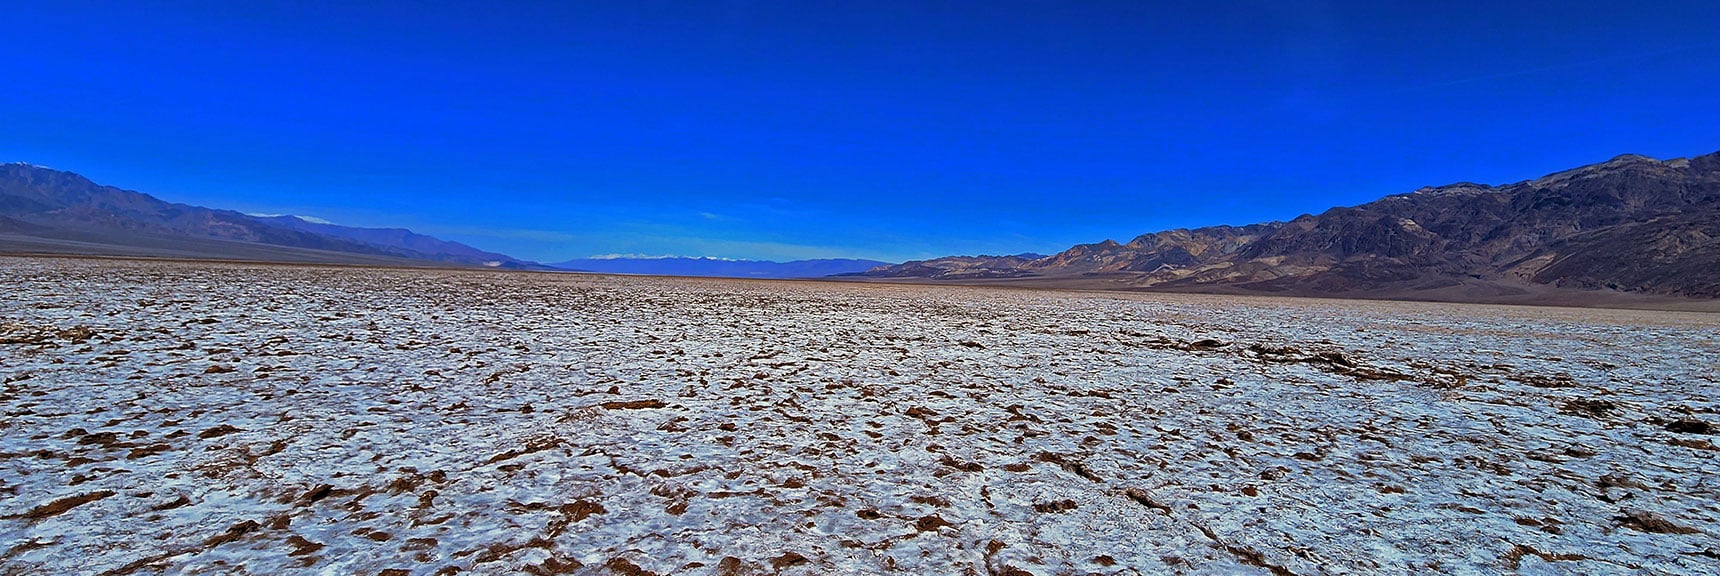 View North While Heading Back Toward Badwater | Death Valley Crossing | Death Valley National Park, California | David Smith | LasVegasAreaTrails.com